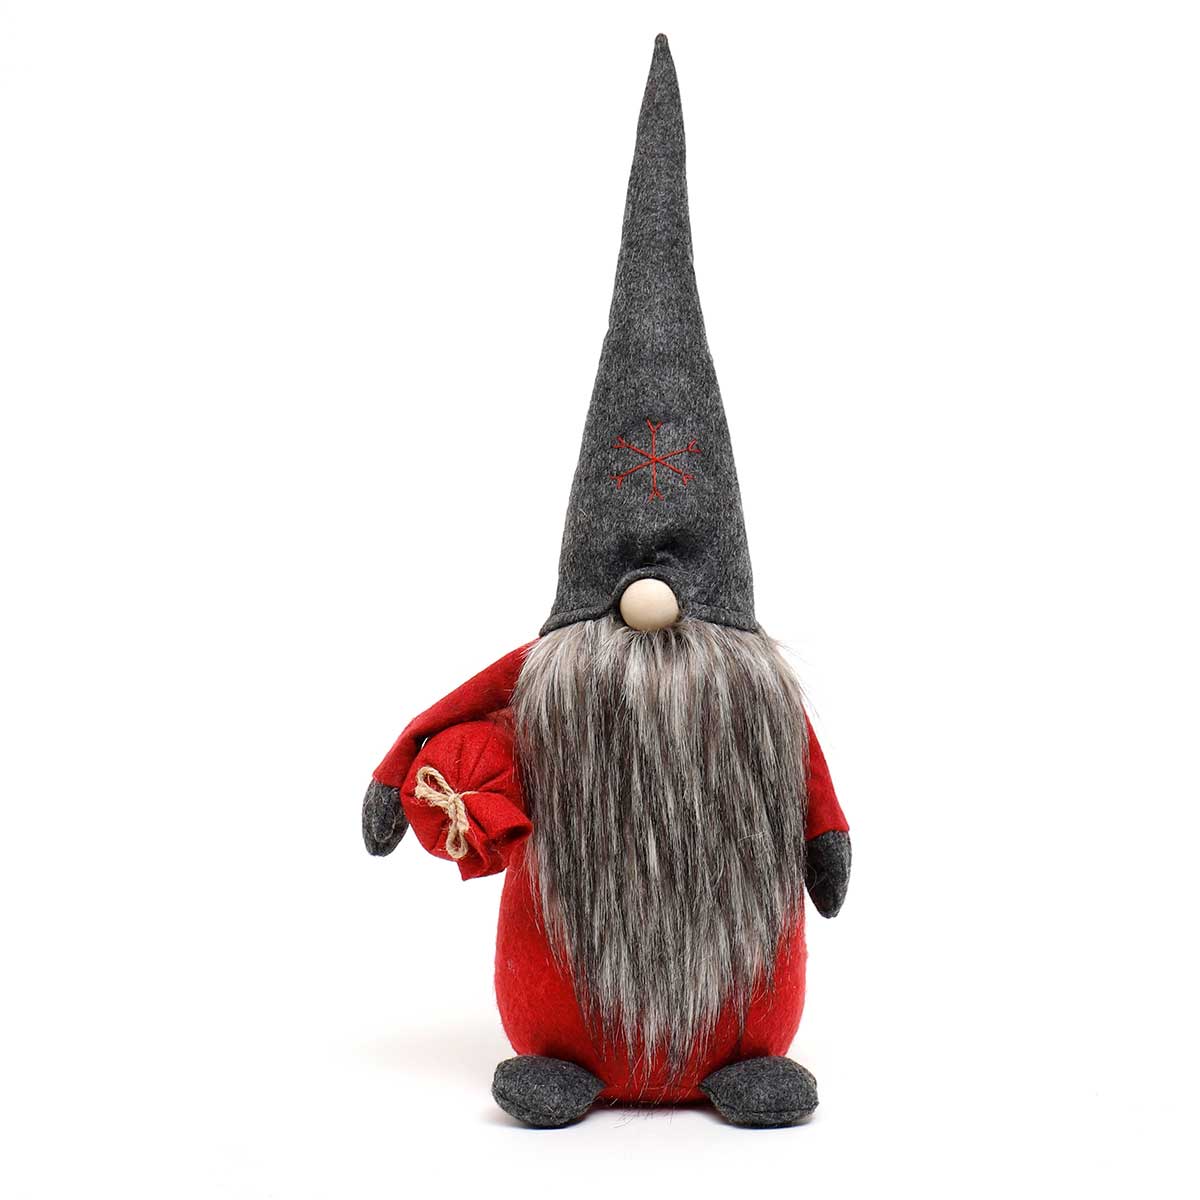 TOMTE GNOME WITH DARK GREY SNOWFLAKE HAT, WOOD NOSE AND RED BAG